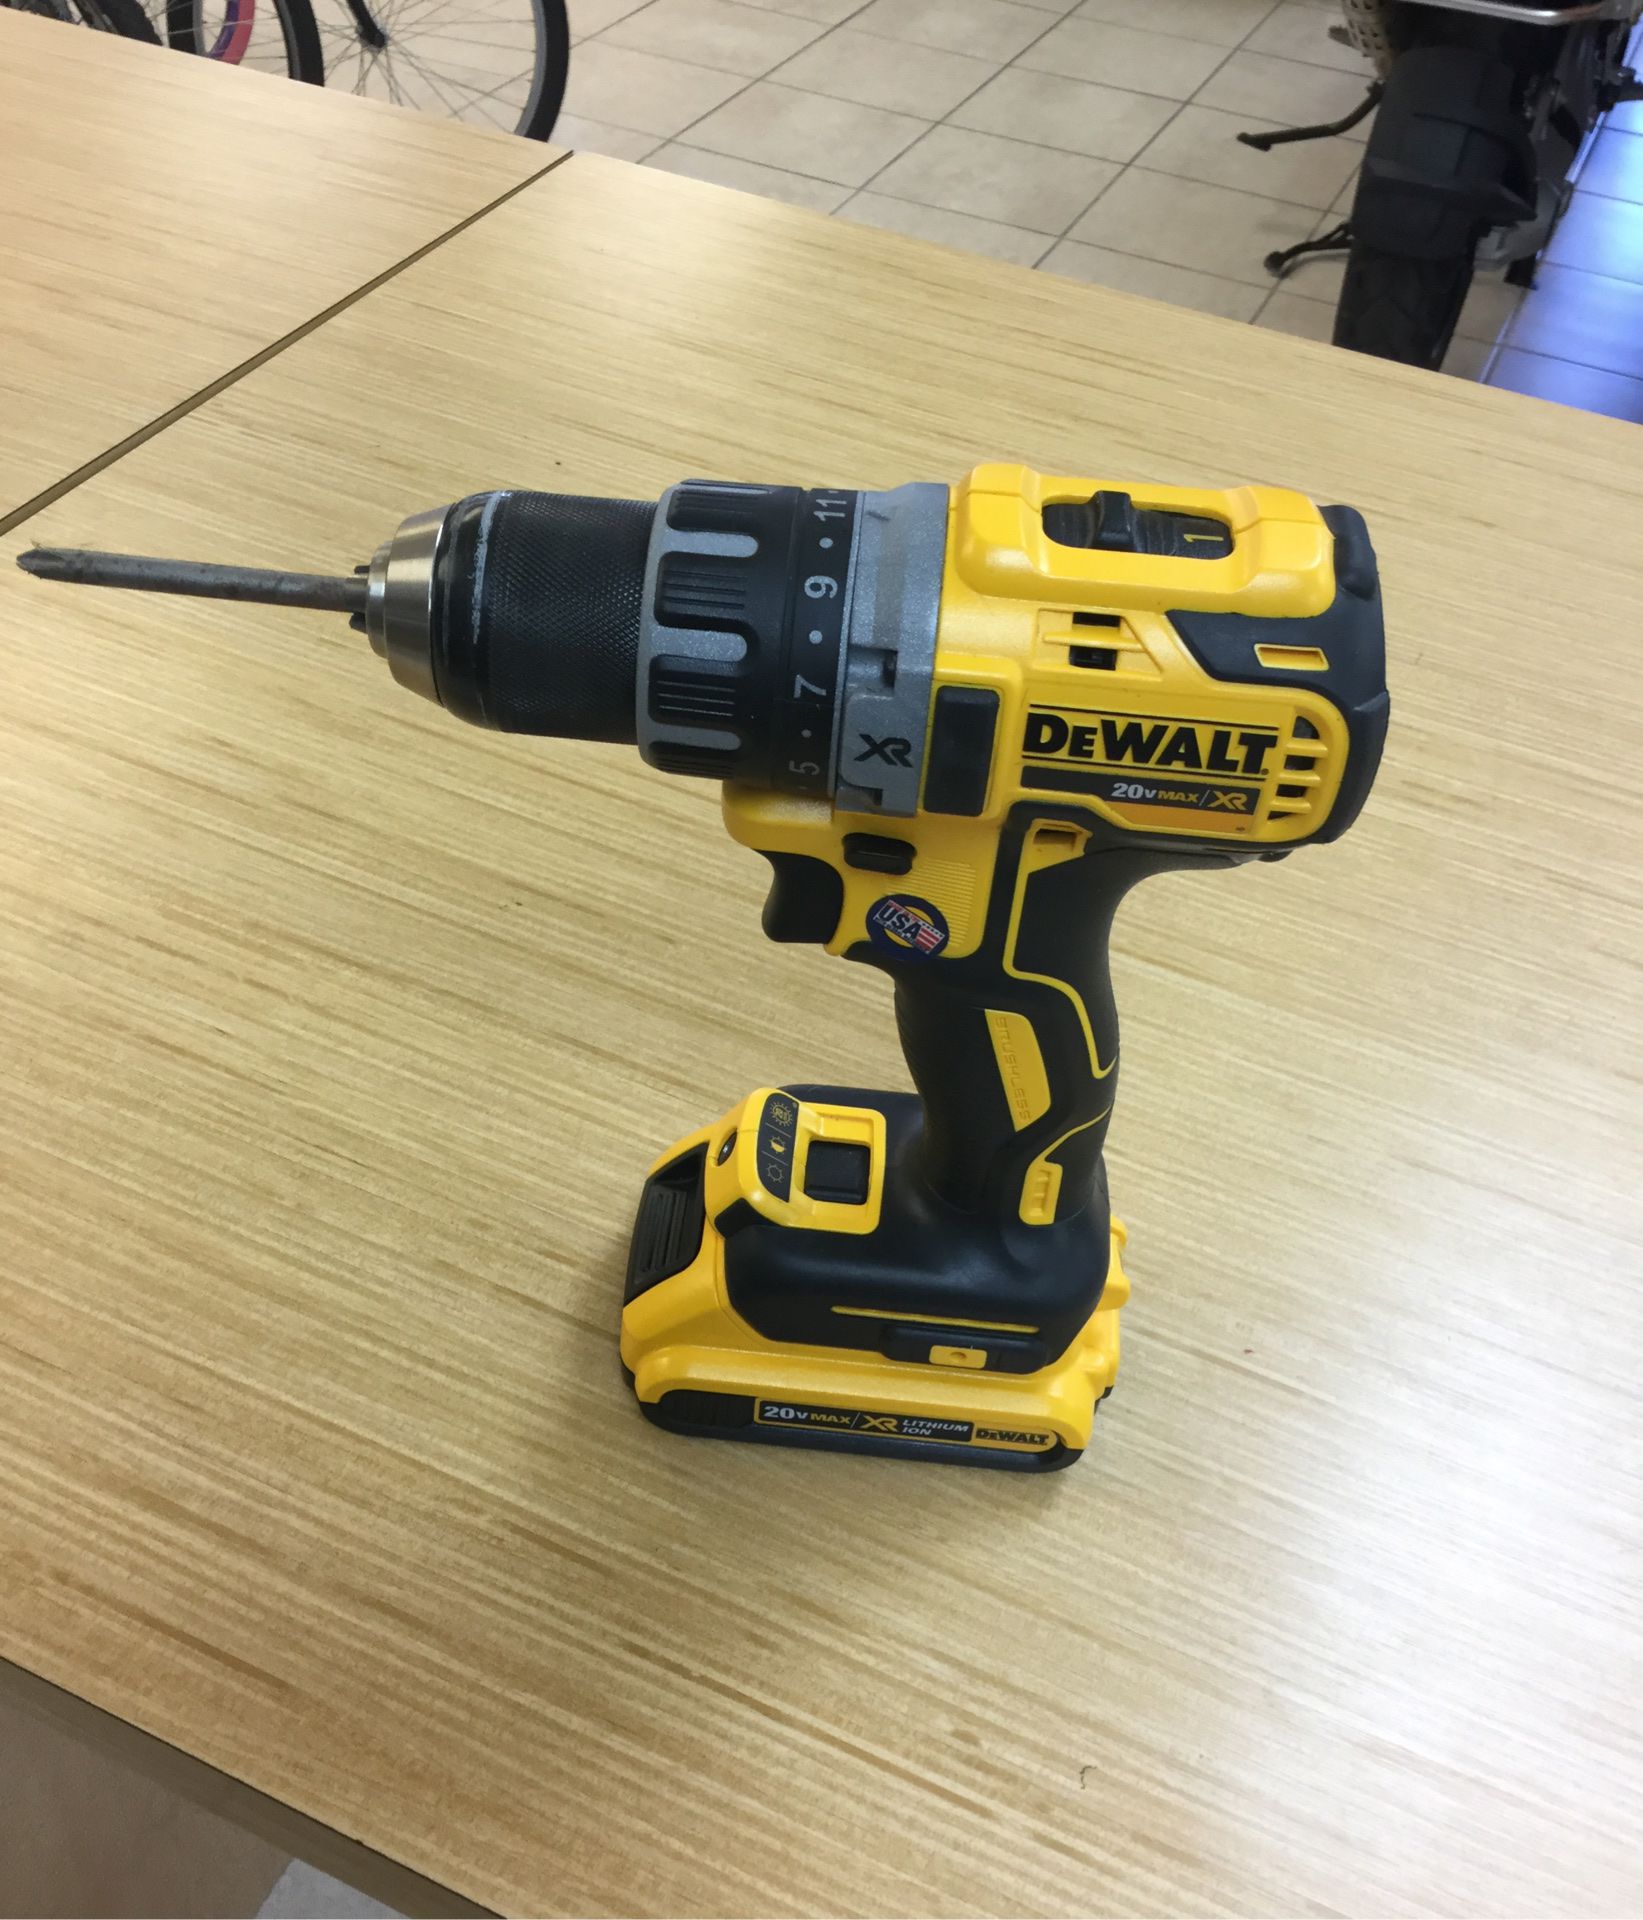 Dewalt Brushless Motor DCD791 Drill Driver Only Battery 20v Max No Charger